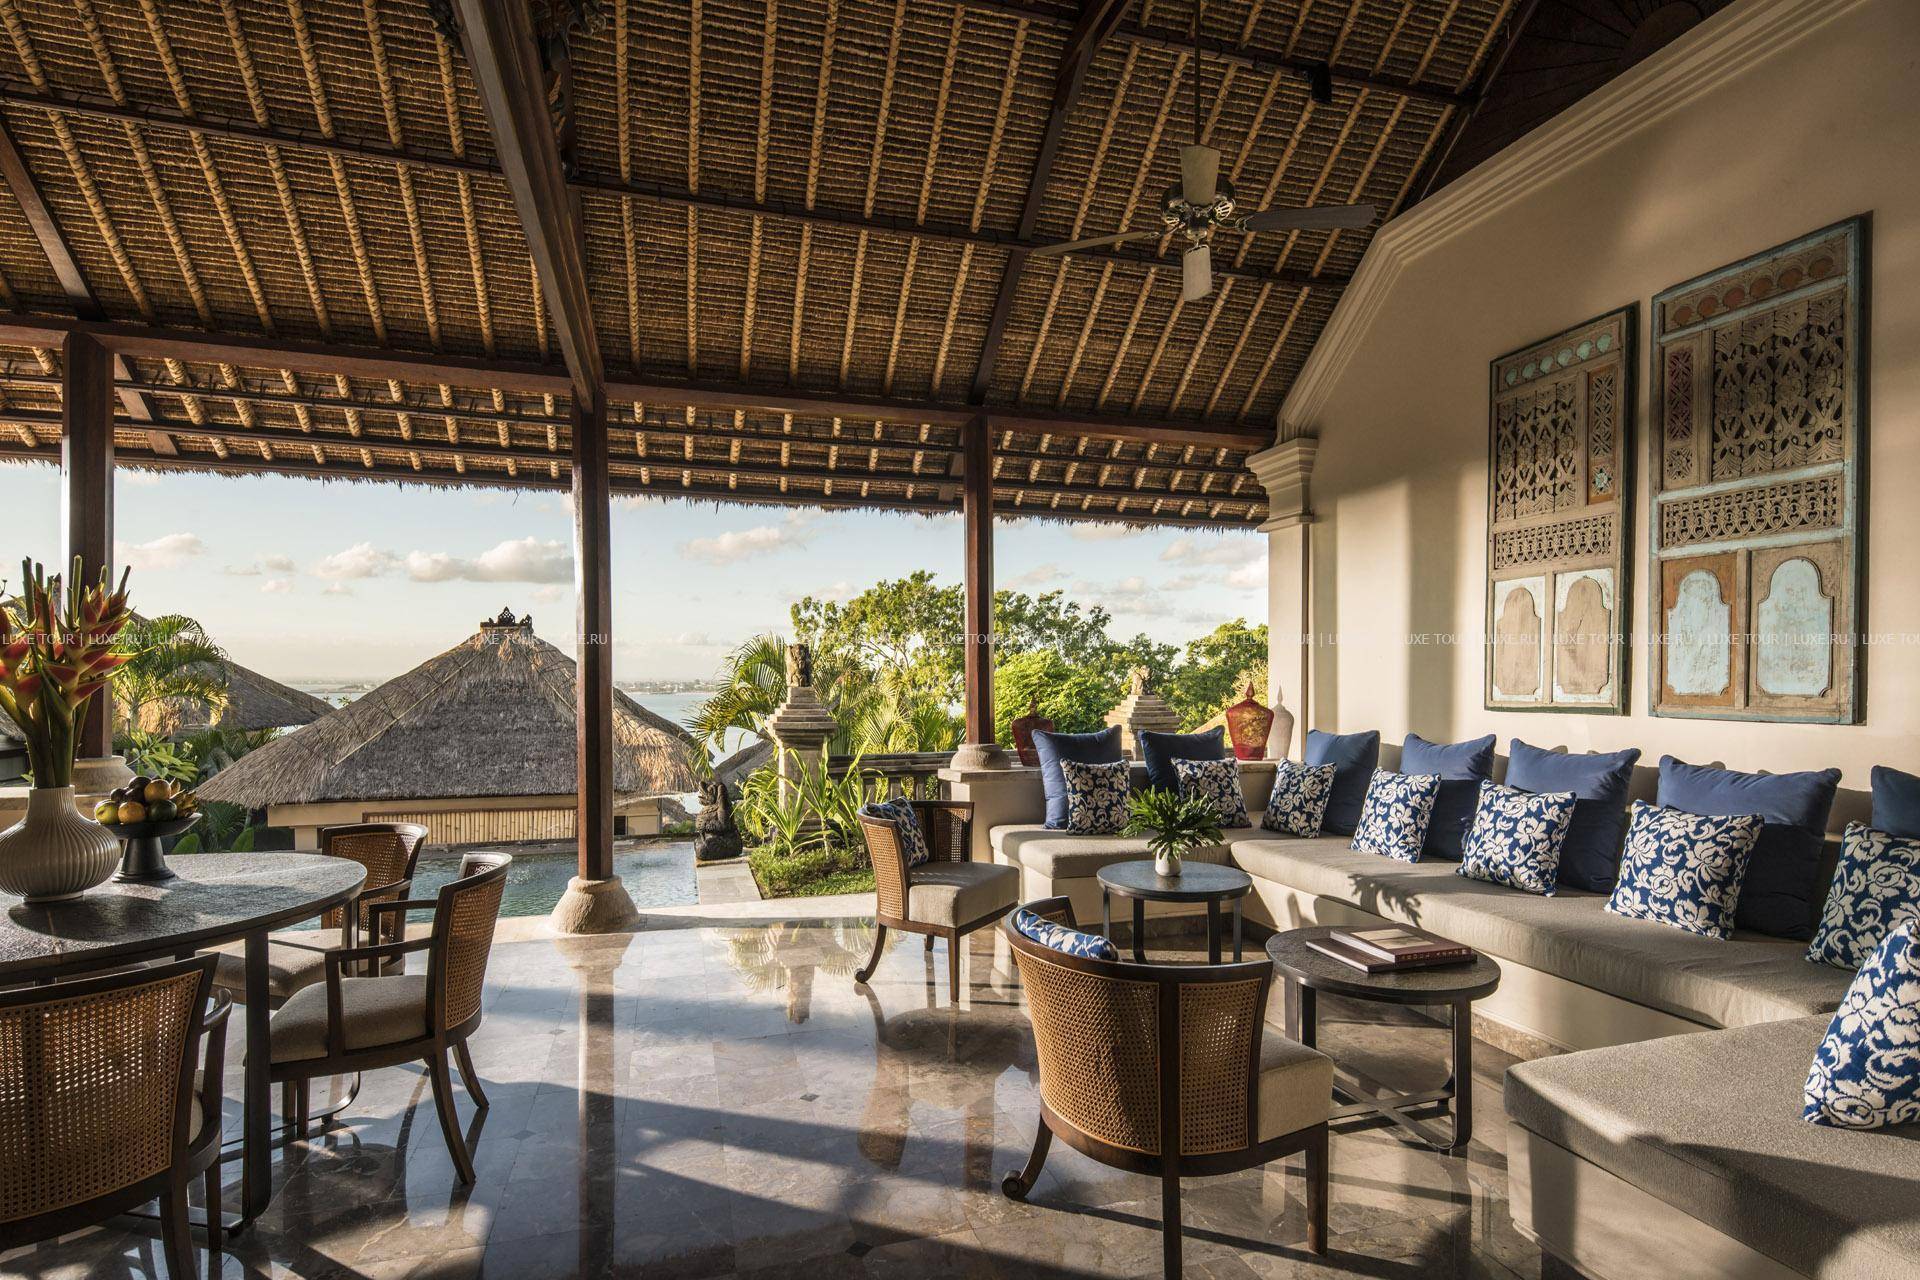 Four seasons resort bali at jimbaran bay - chse certified: 2022 pictures, reviews, prices & deals | expedia.ca